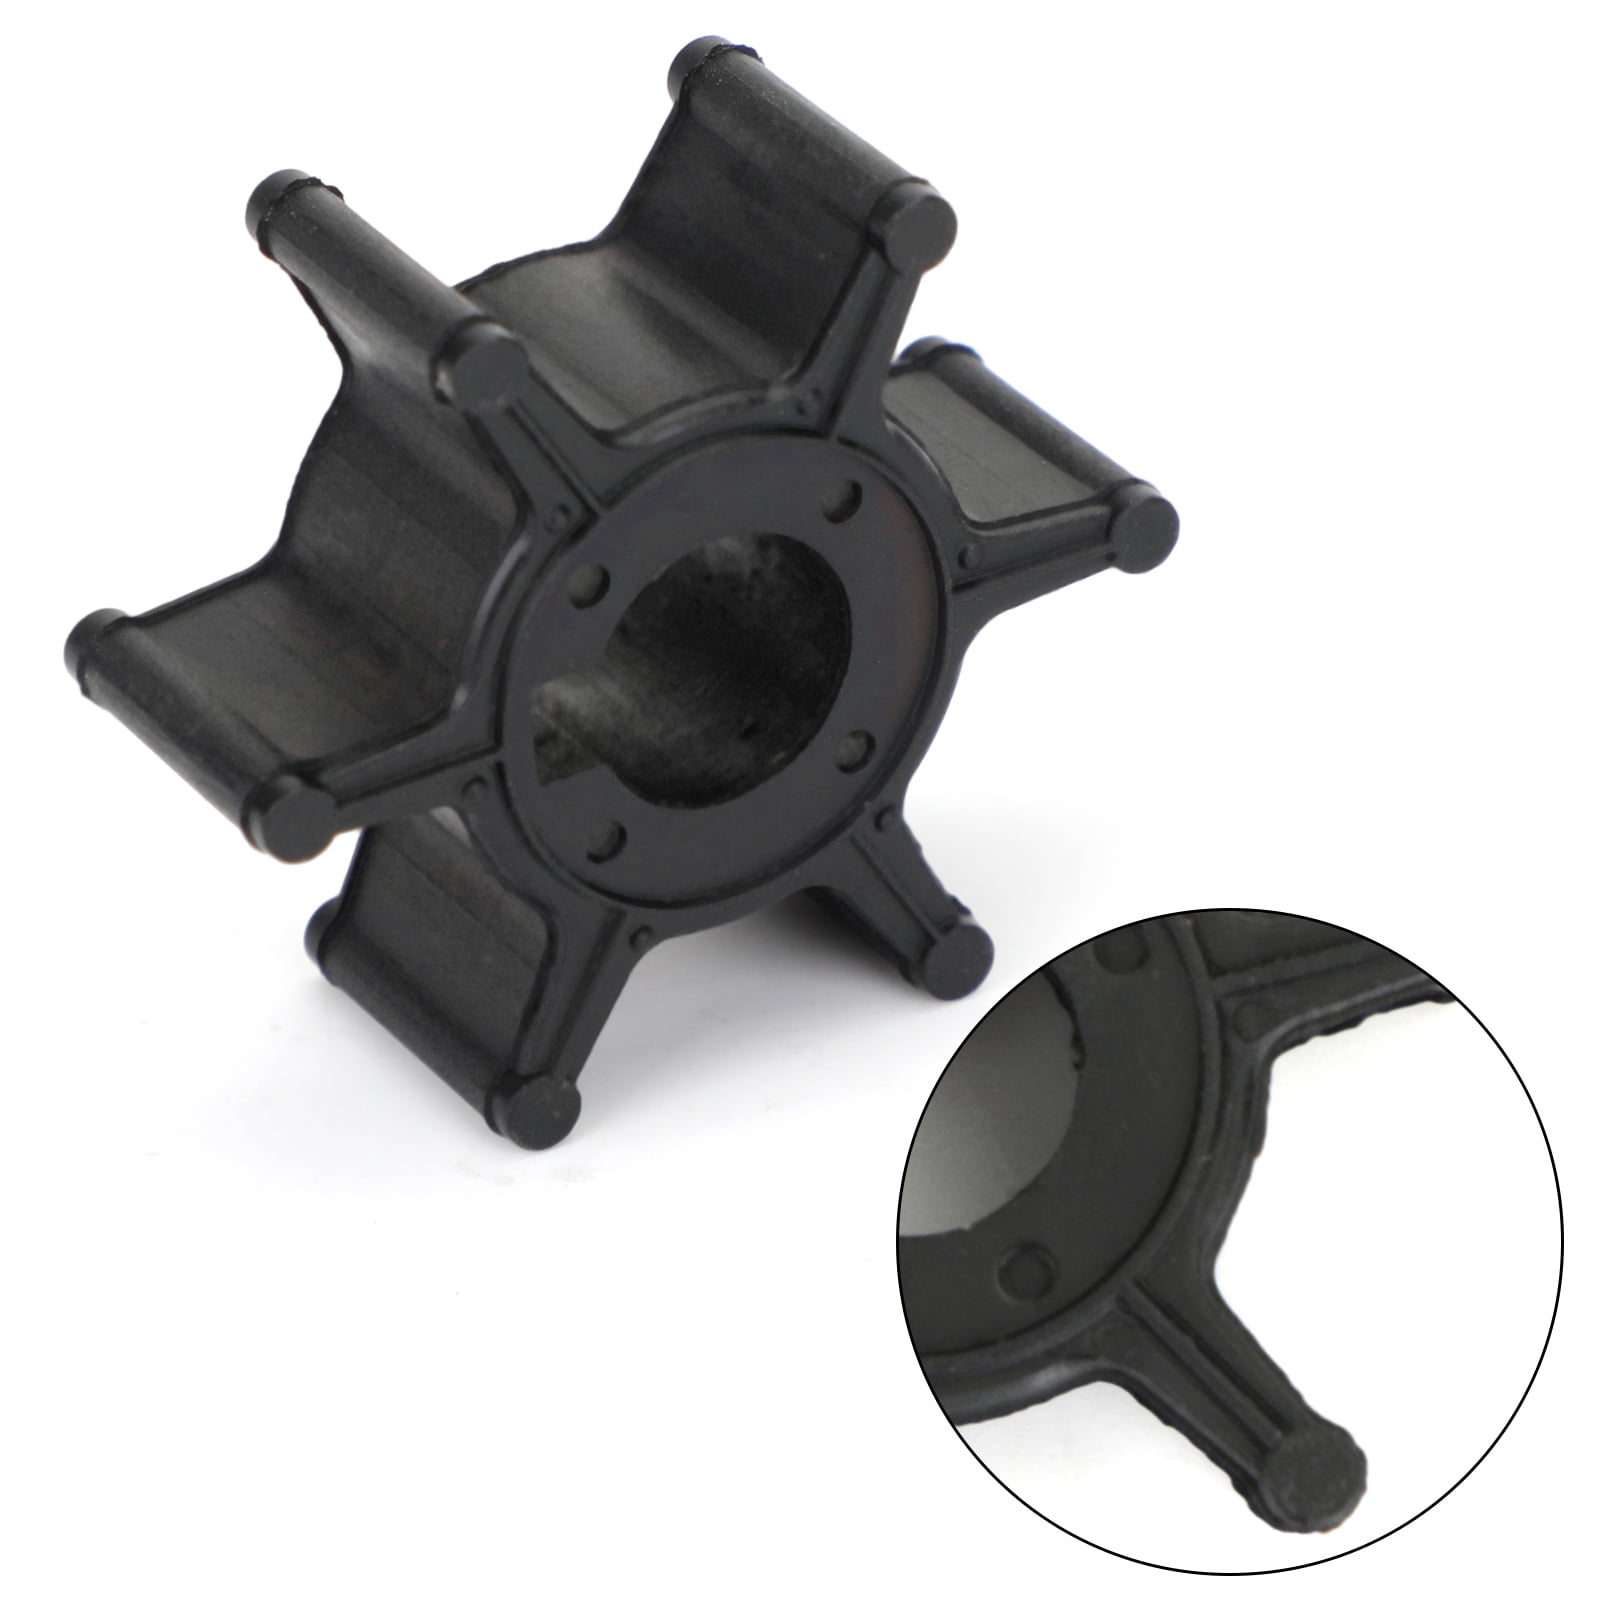 Water Pump Impeller丨 Boat/Yacht Spare Parts丨 6L5 44352 00 Water Pump  Impeller Fit For Yamaha 3A Malta 2 Stroke Outboard Models